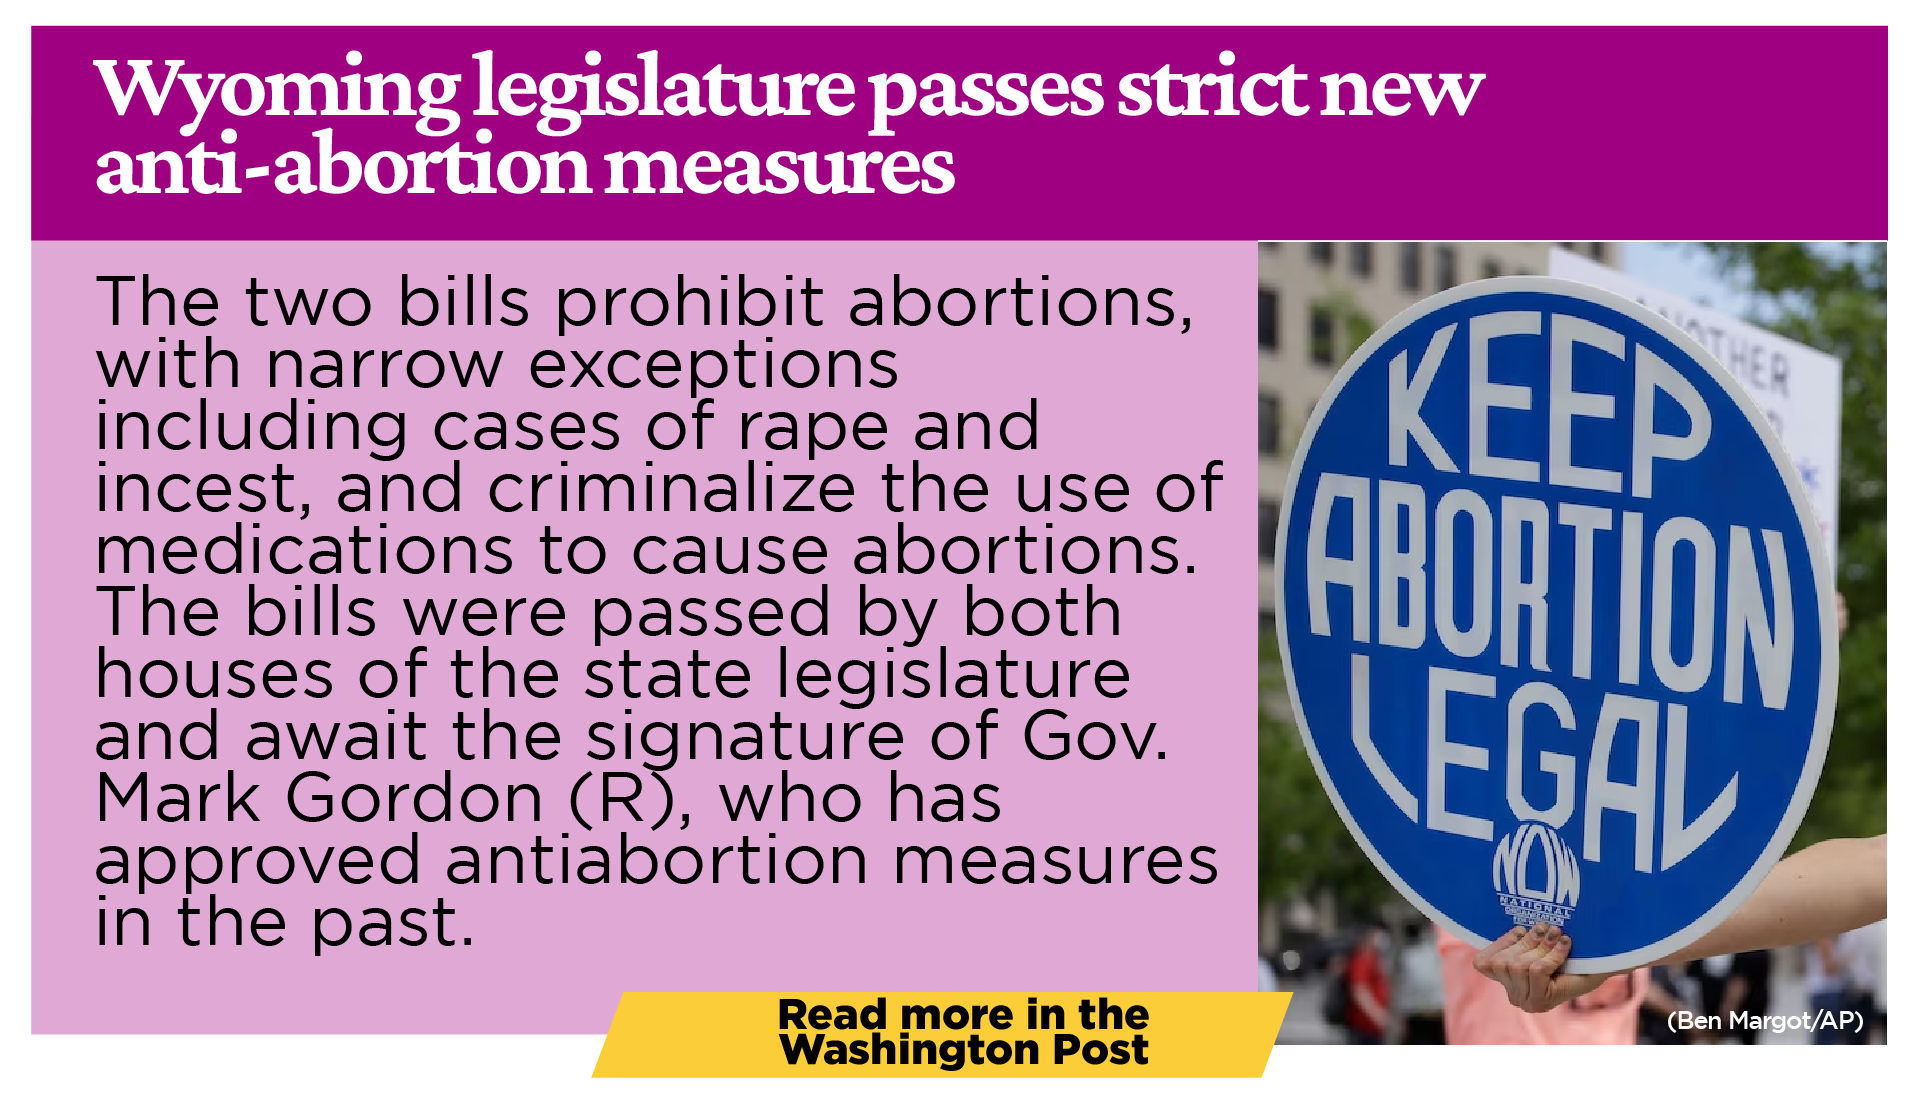 Wyoming legislature passes strict new anti-abortion measures The two bills prohibit abortions, with narrow exceptions including cases of rape and incest, and criminalize the use of medications to cause abortions. The bills were passed by both houses of the state legislature and await the signature of Gov. Mark Gordon (R), who has approved antiabortion measures in the past. Gordon has 15 calendar days to act on the bills and will consider them carefully, said his spokesman Michael Pearlman.